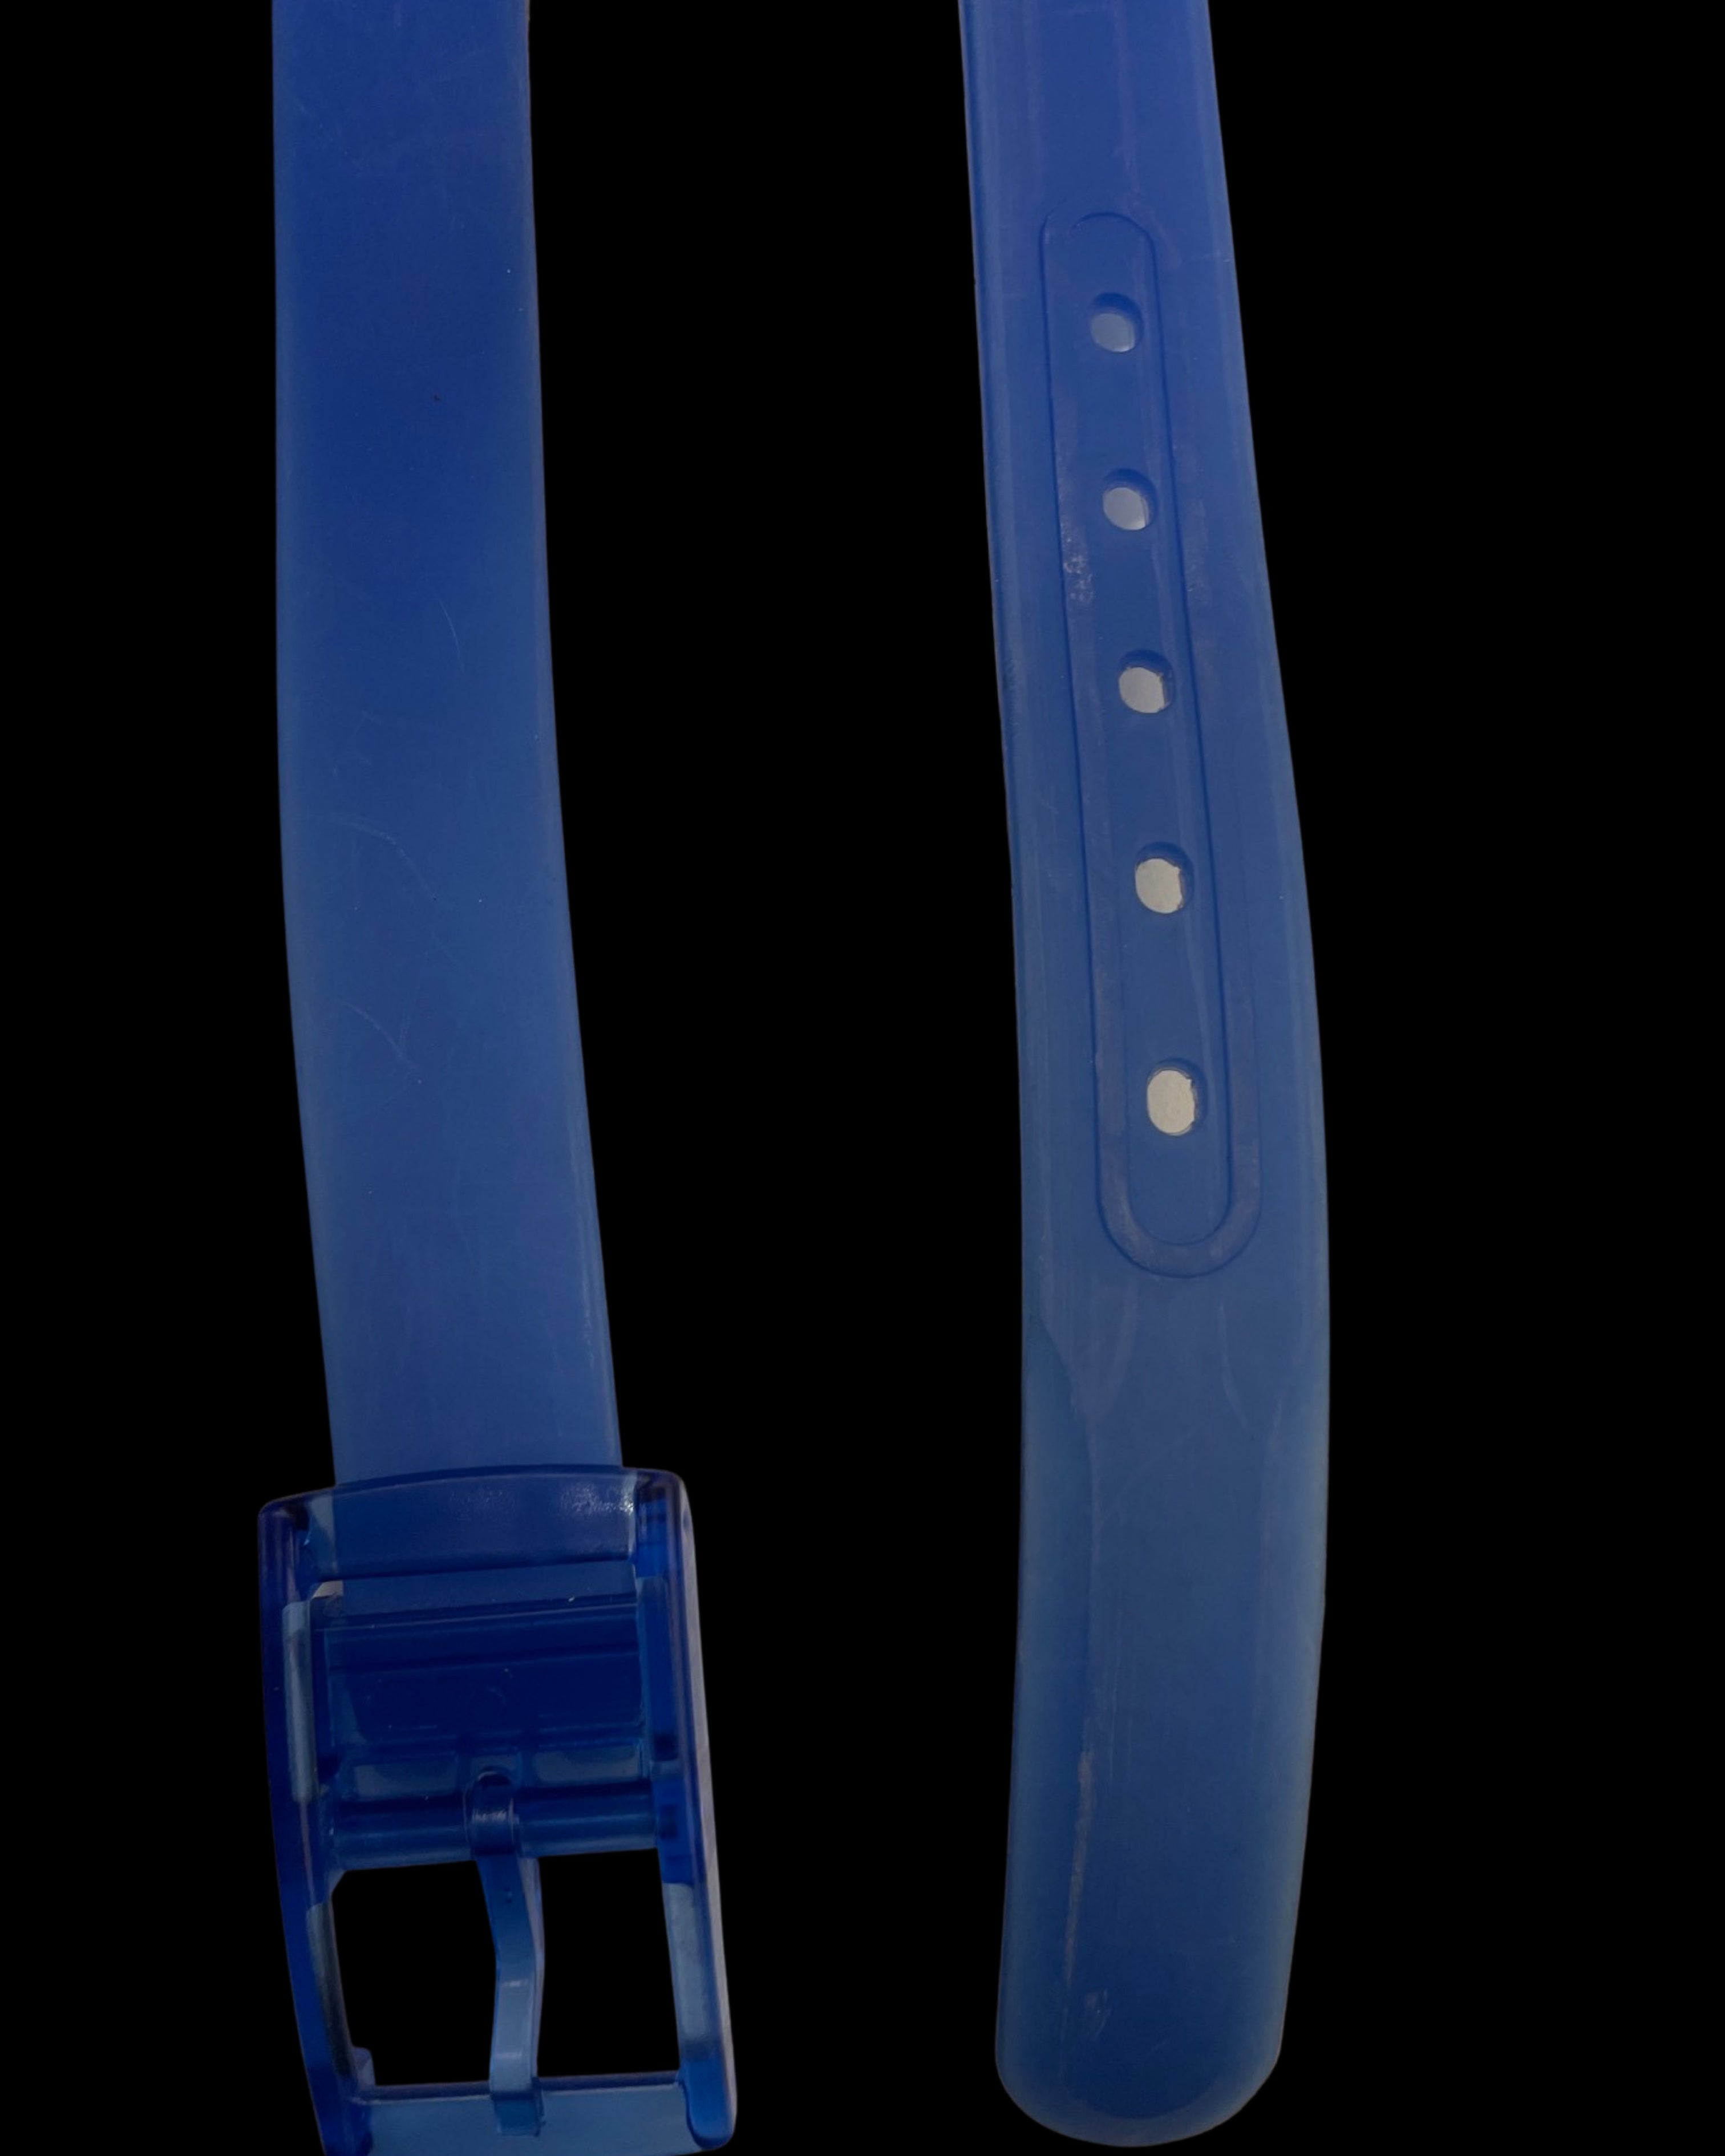 Vintage Unisex Smooth Silicone Rubber Leather Belt Plastic Buckle in Blue